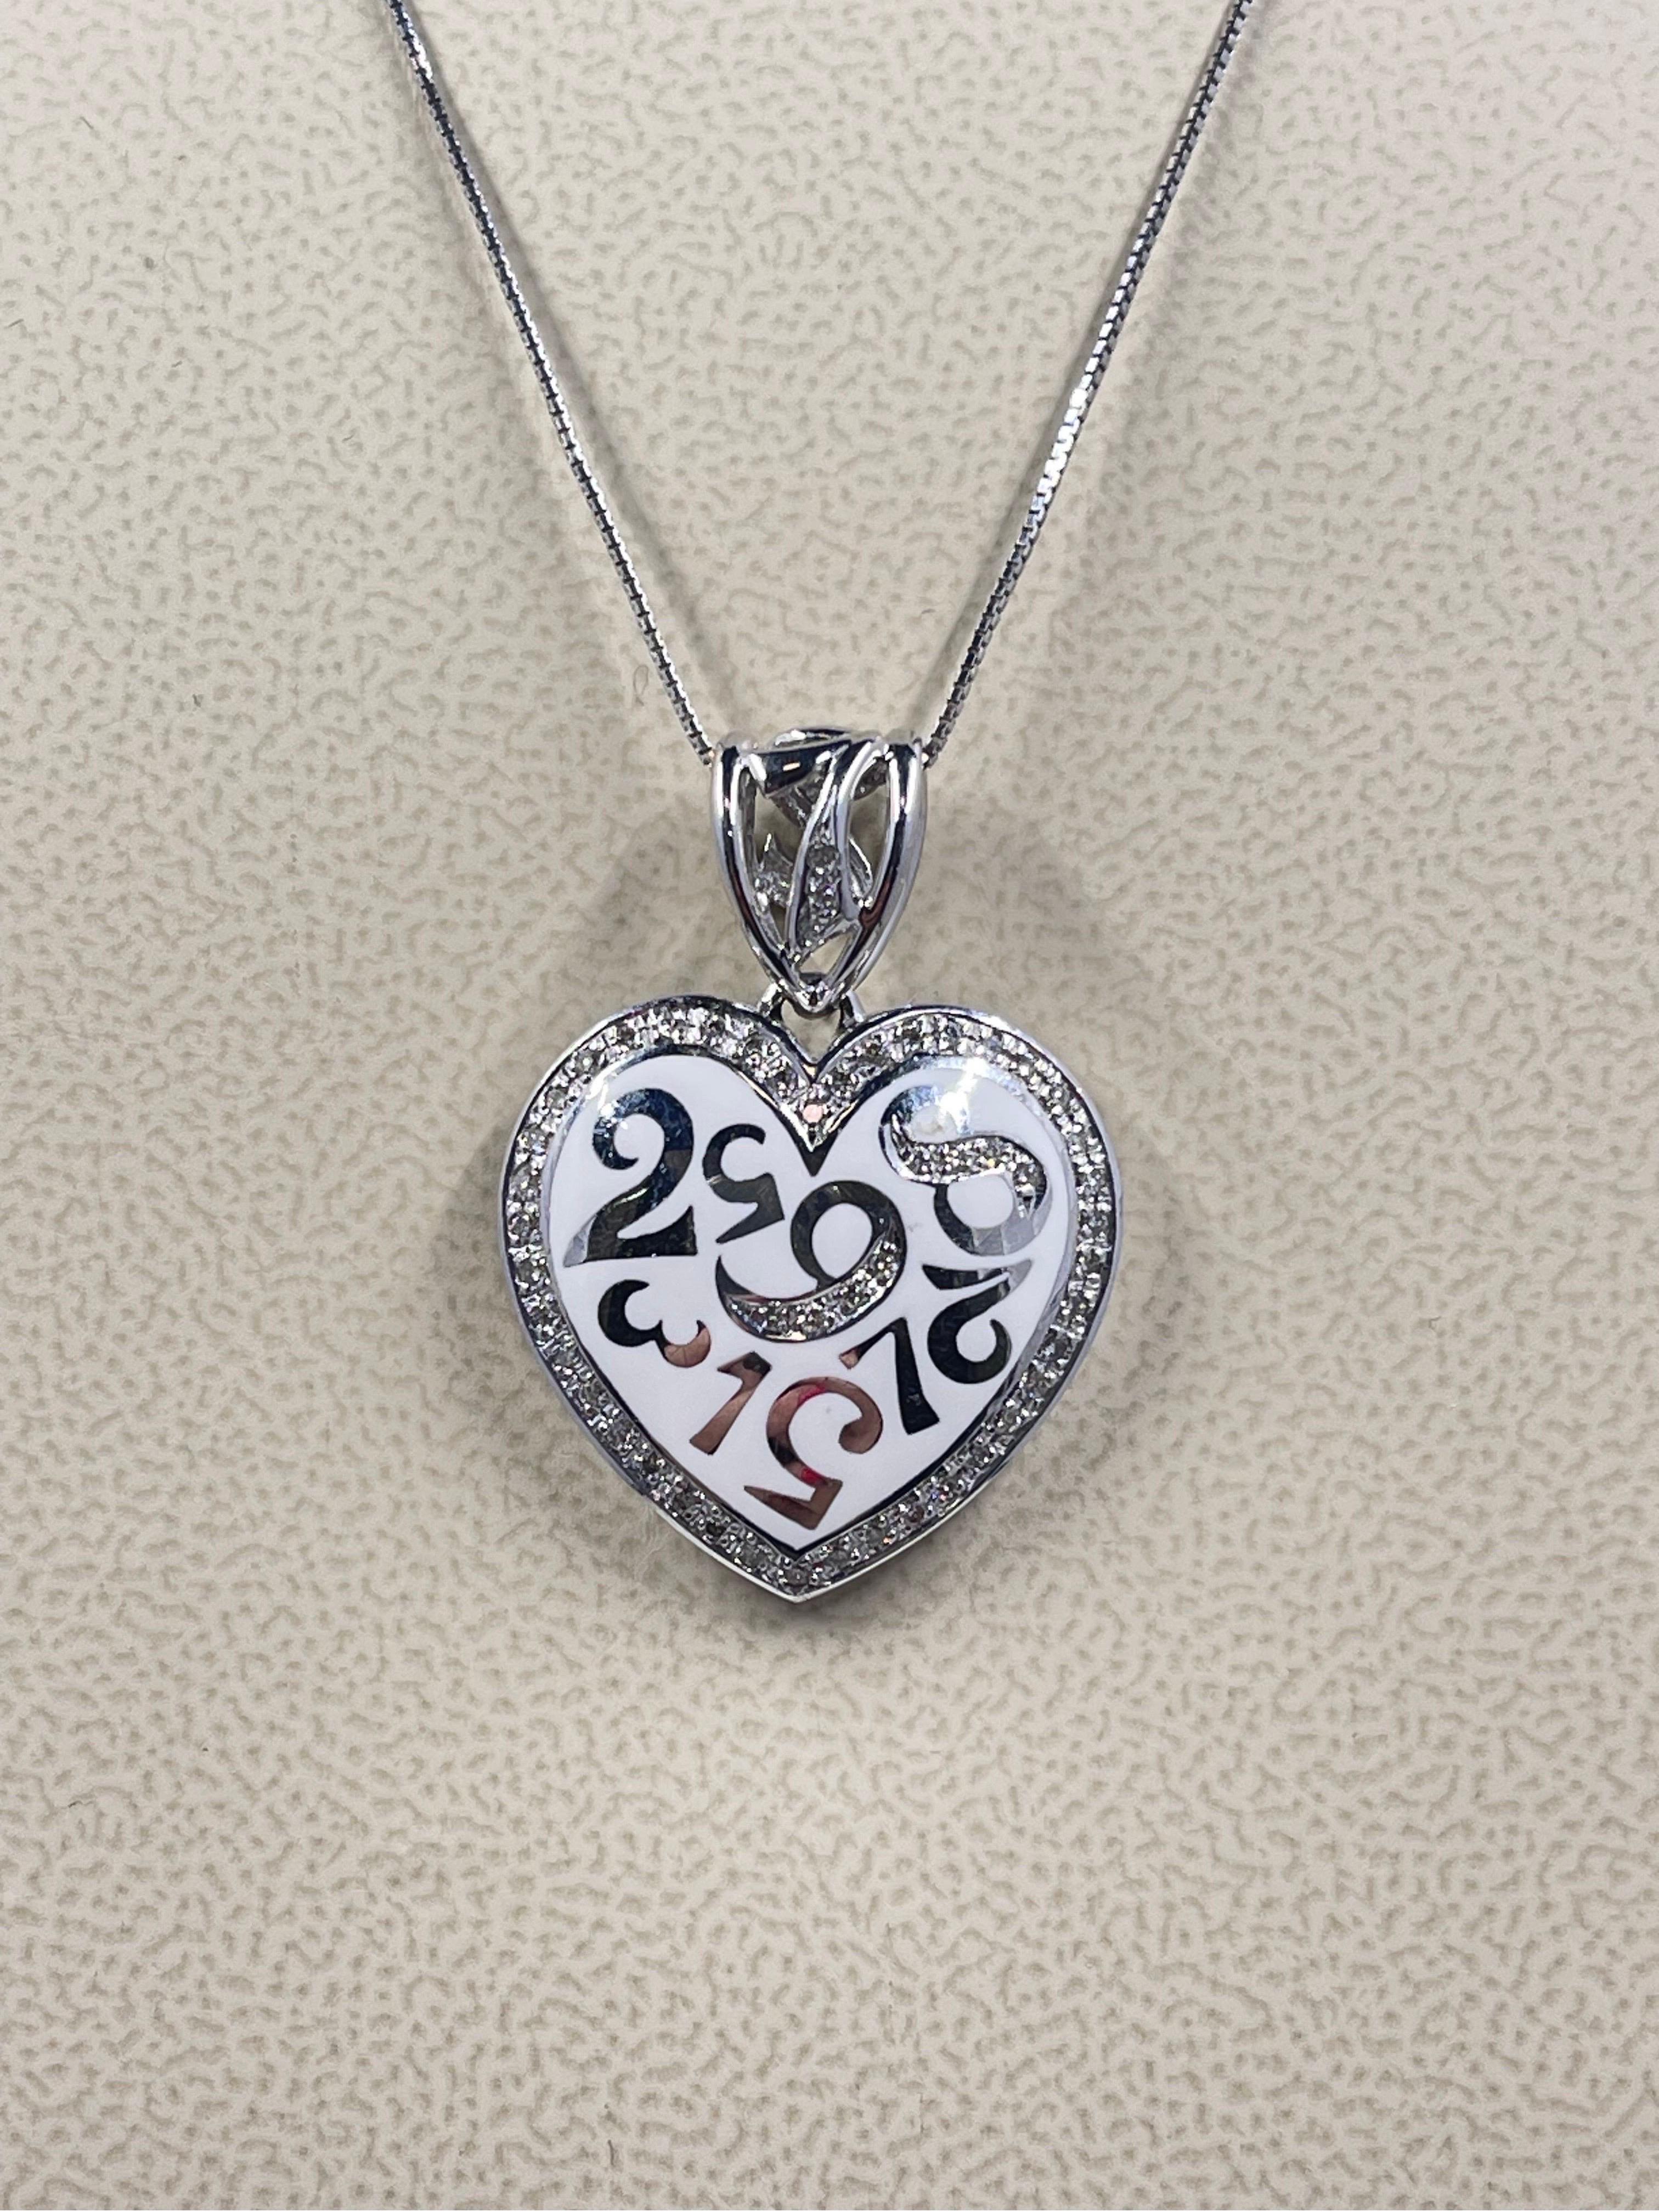 Round Cut Diamond And White Enamel Heart Necklace In 148k White Gold  For Sale